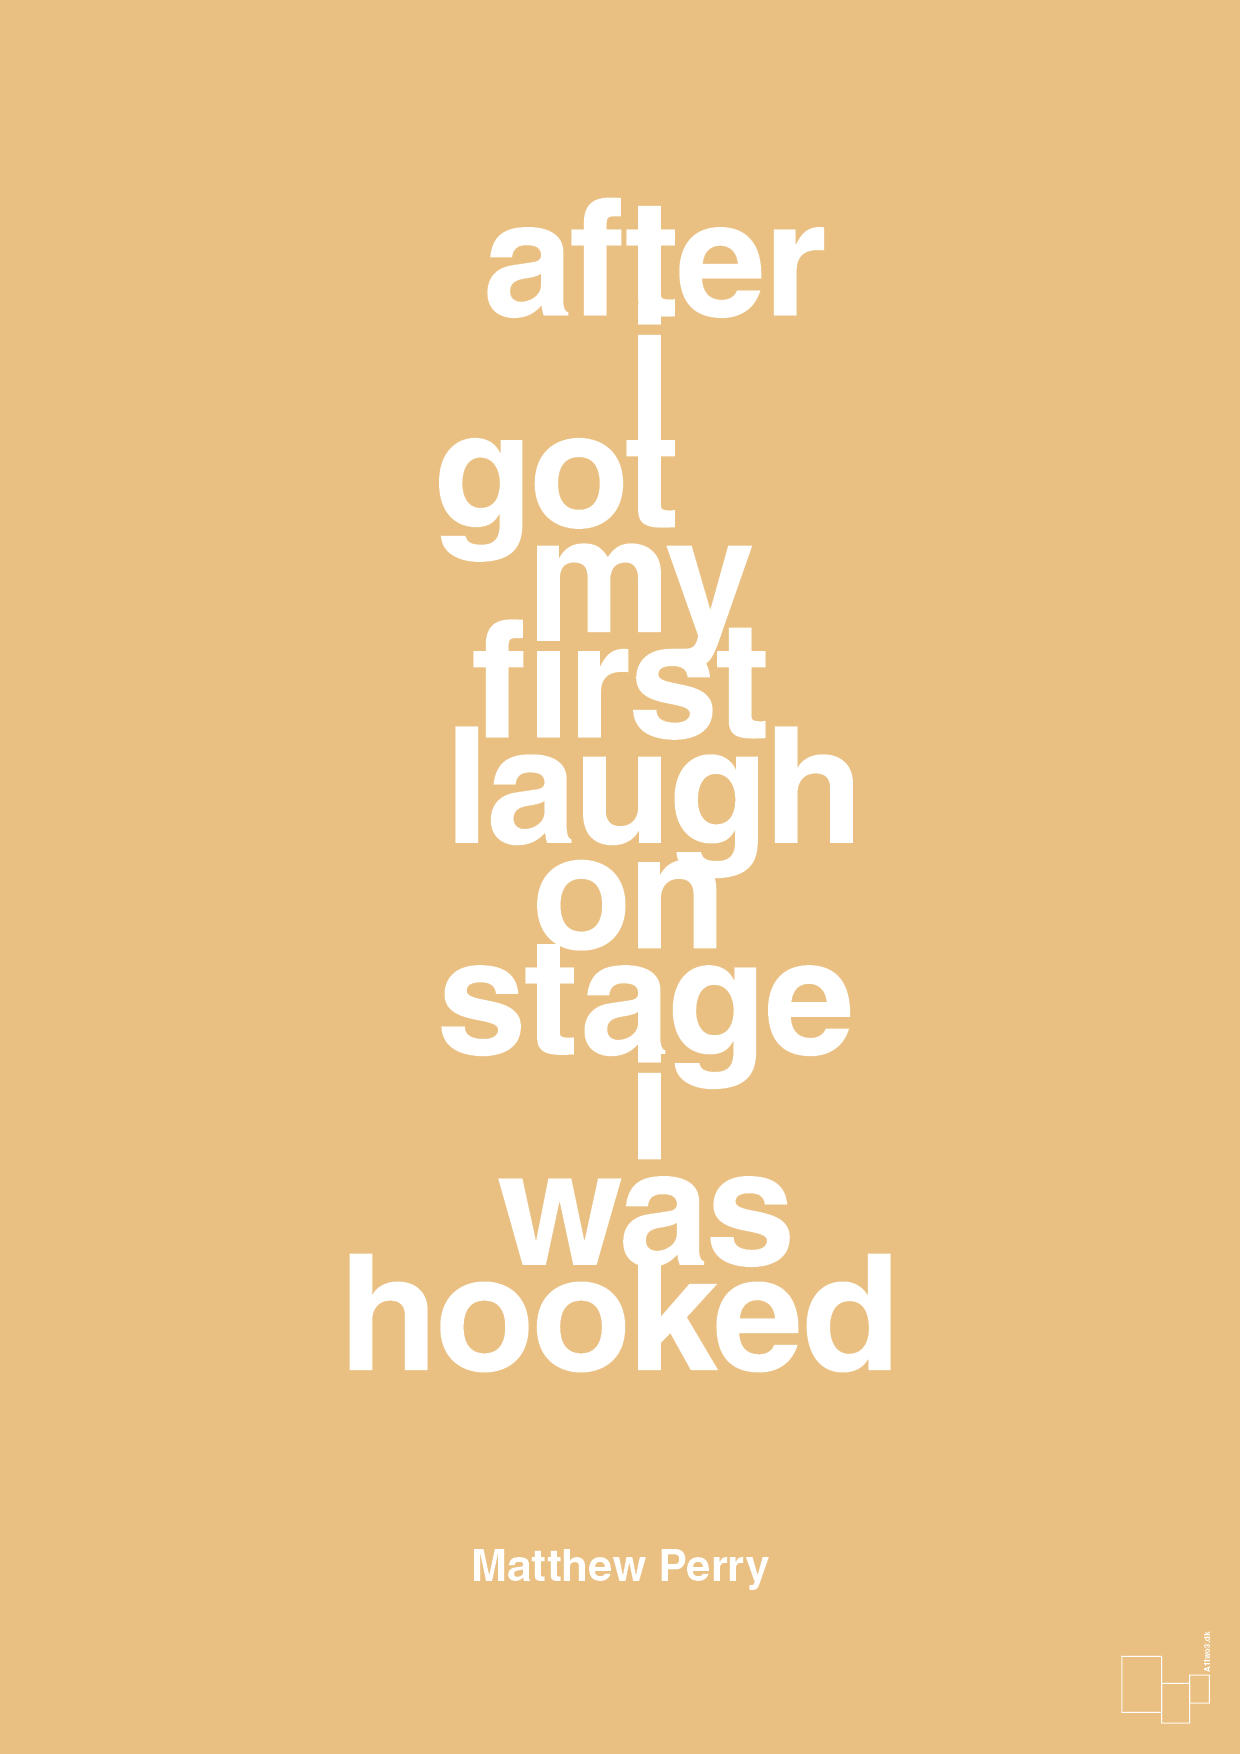 after i got my first laugh on stage i was hooked - Plakat med Citater i Charismatic